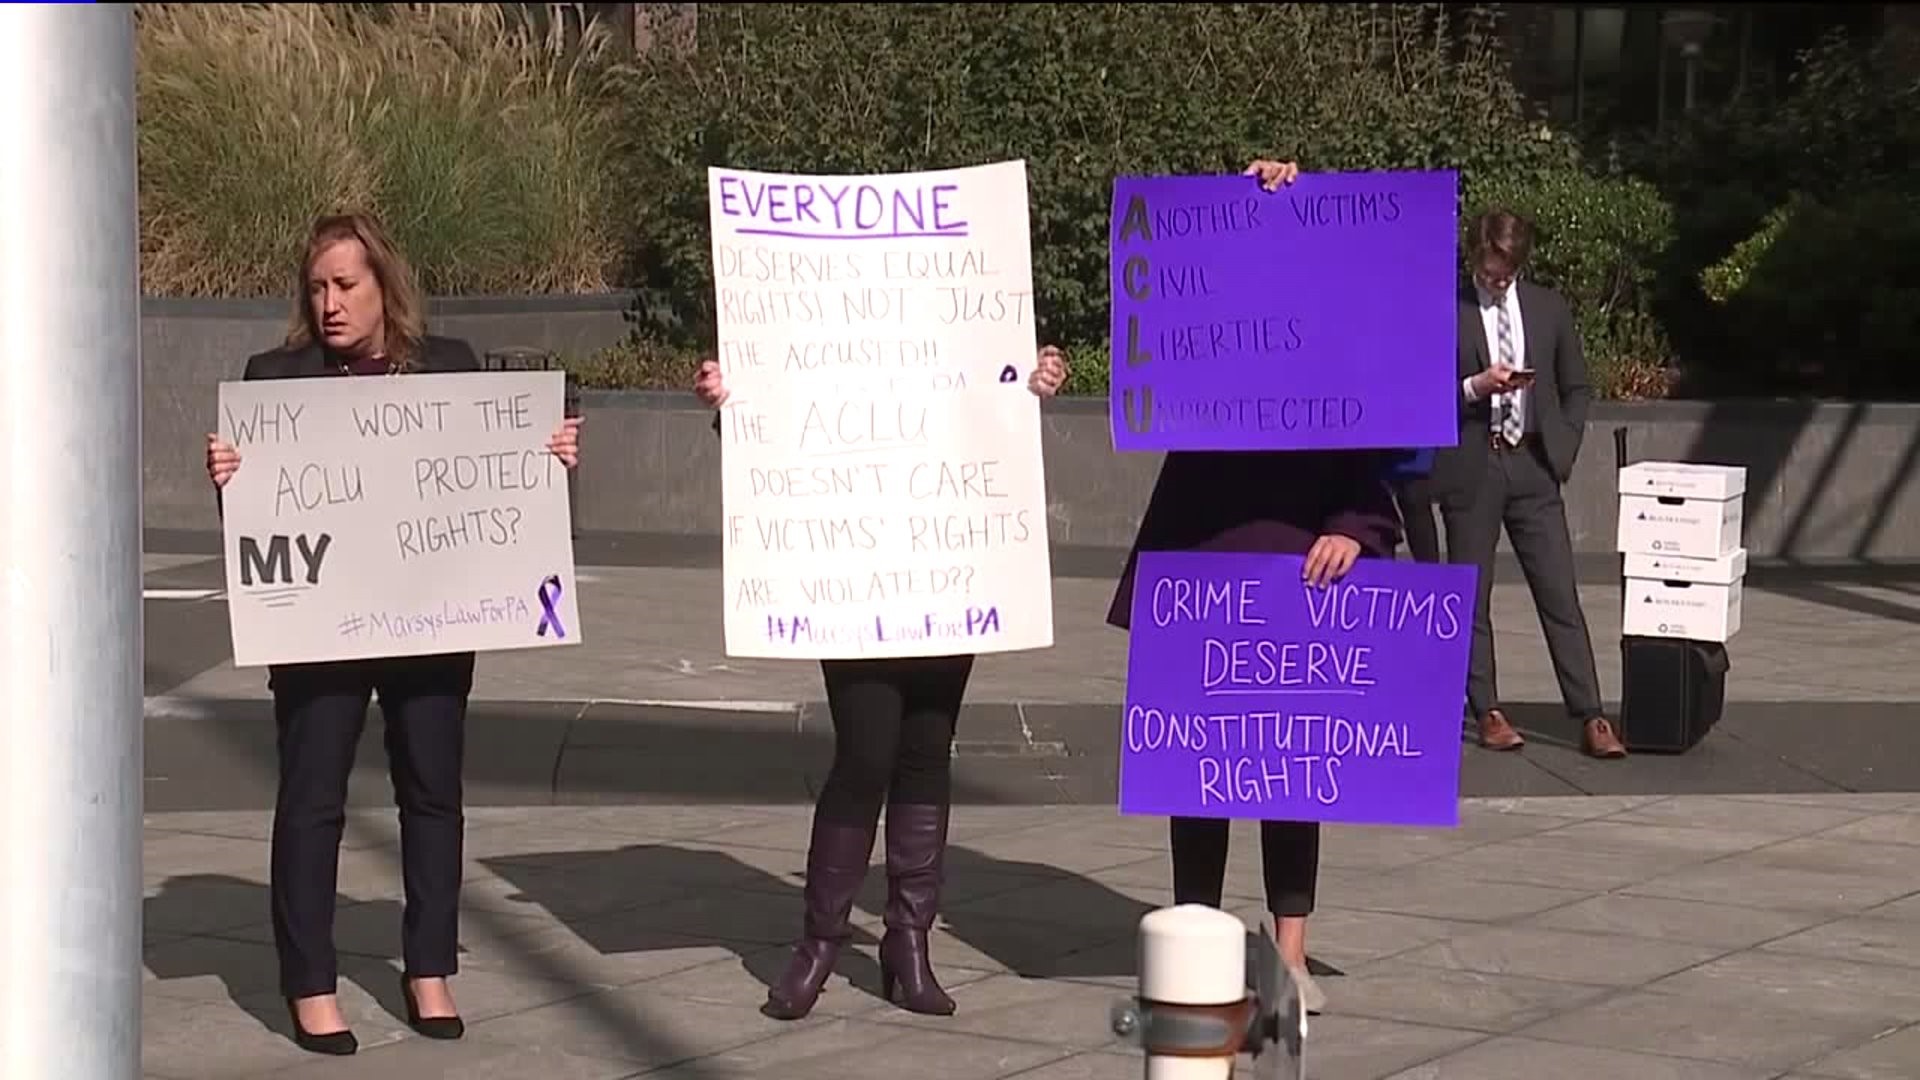 Marsy's Law: Fighting for Rights of Crime Victims